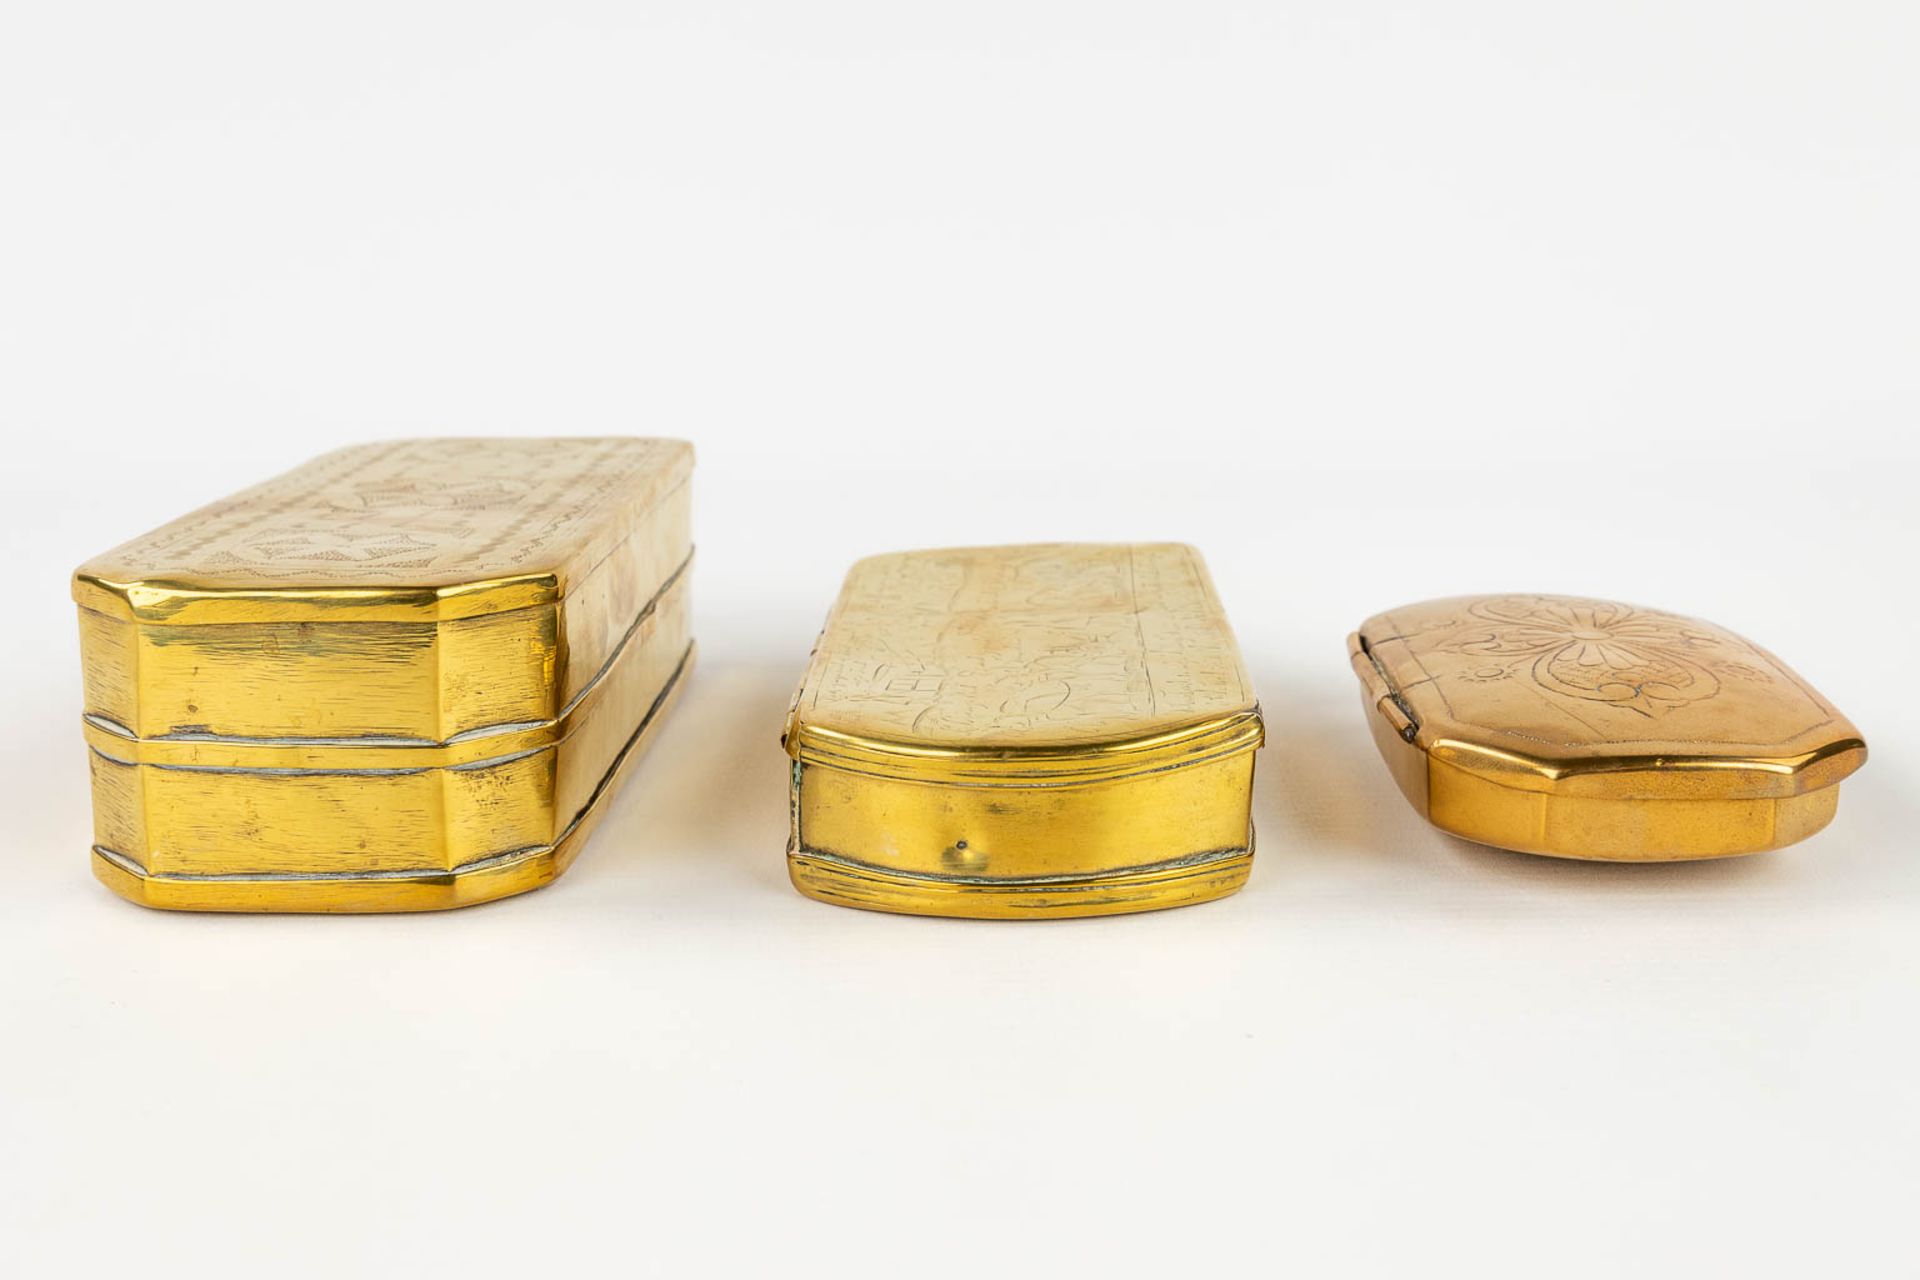 A collection of 3 antique oval tobacco boxes, made of copper. 18th/19th C. (L: 7 x W: 12 x H: 3,5 cm - Image 12 of 13